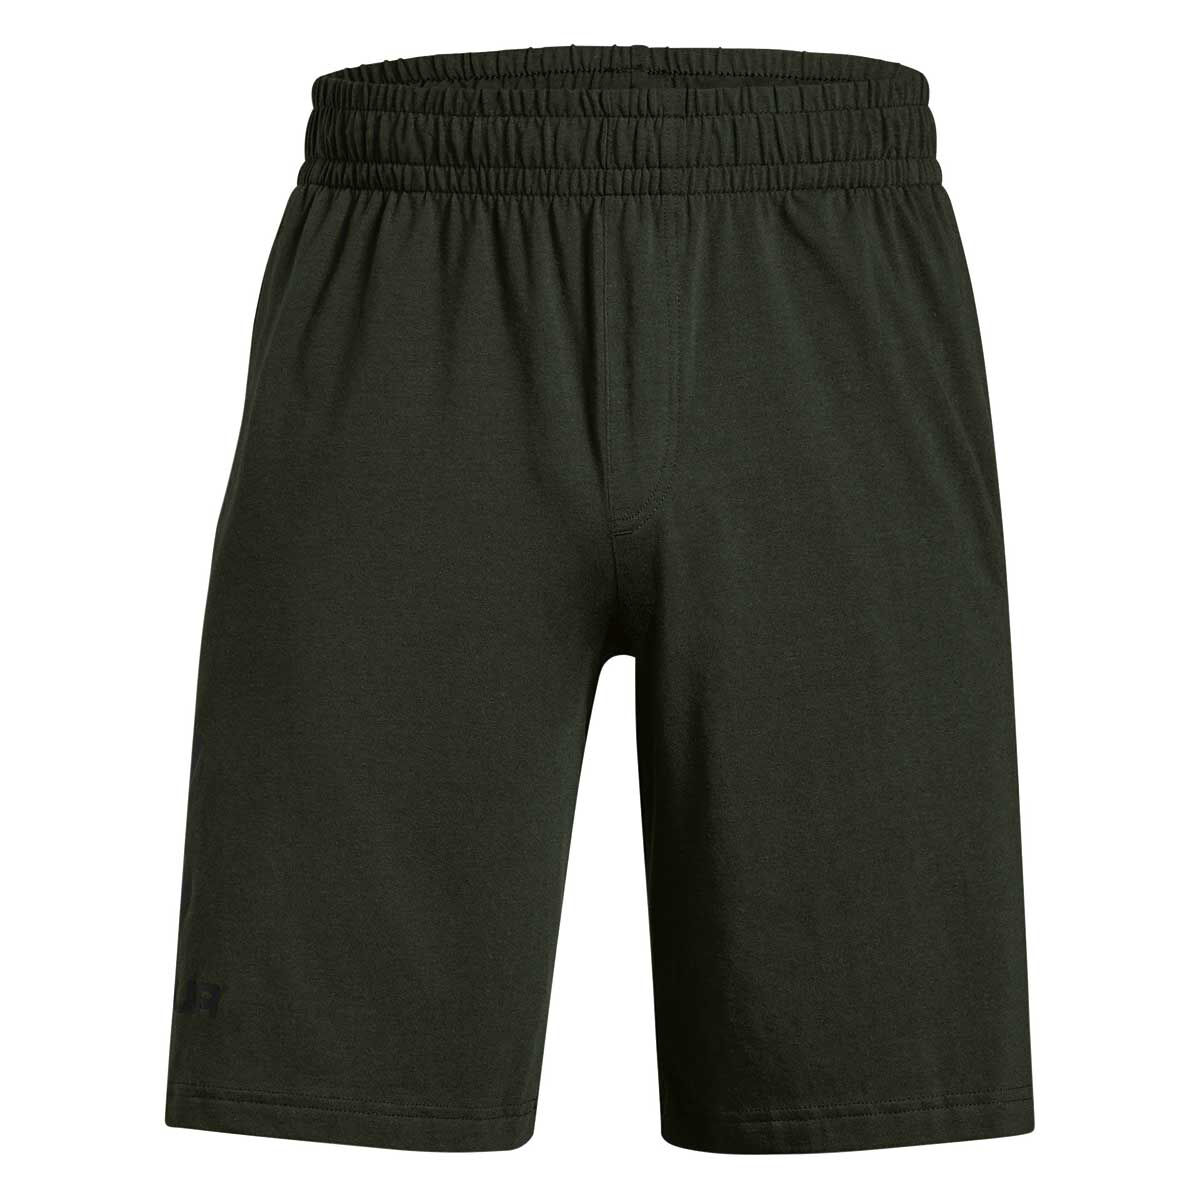 under armour cotton shorts Sale,up to 